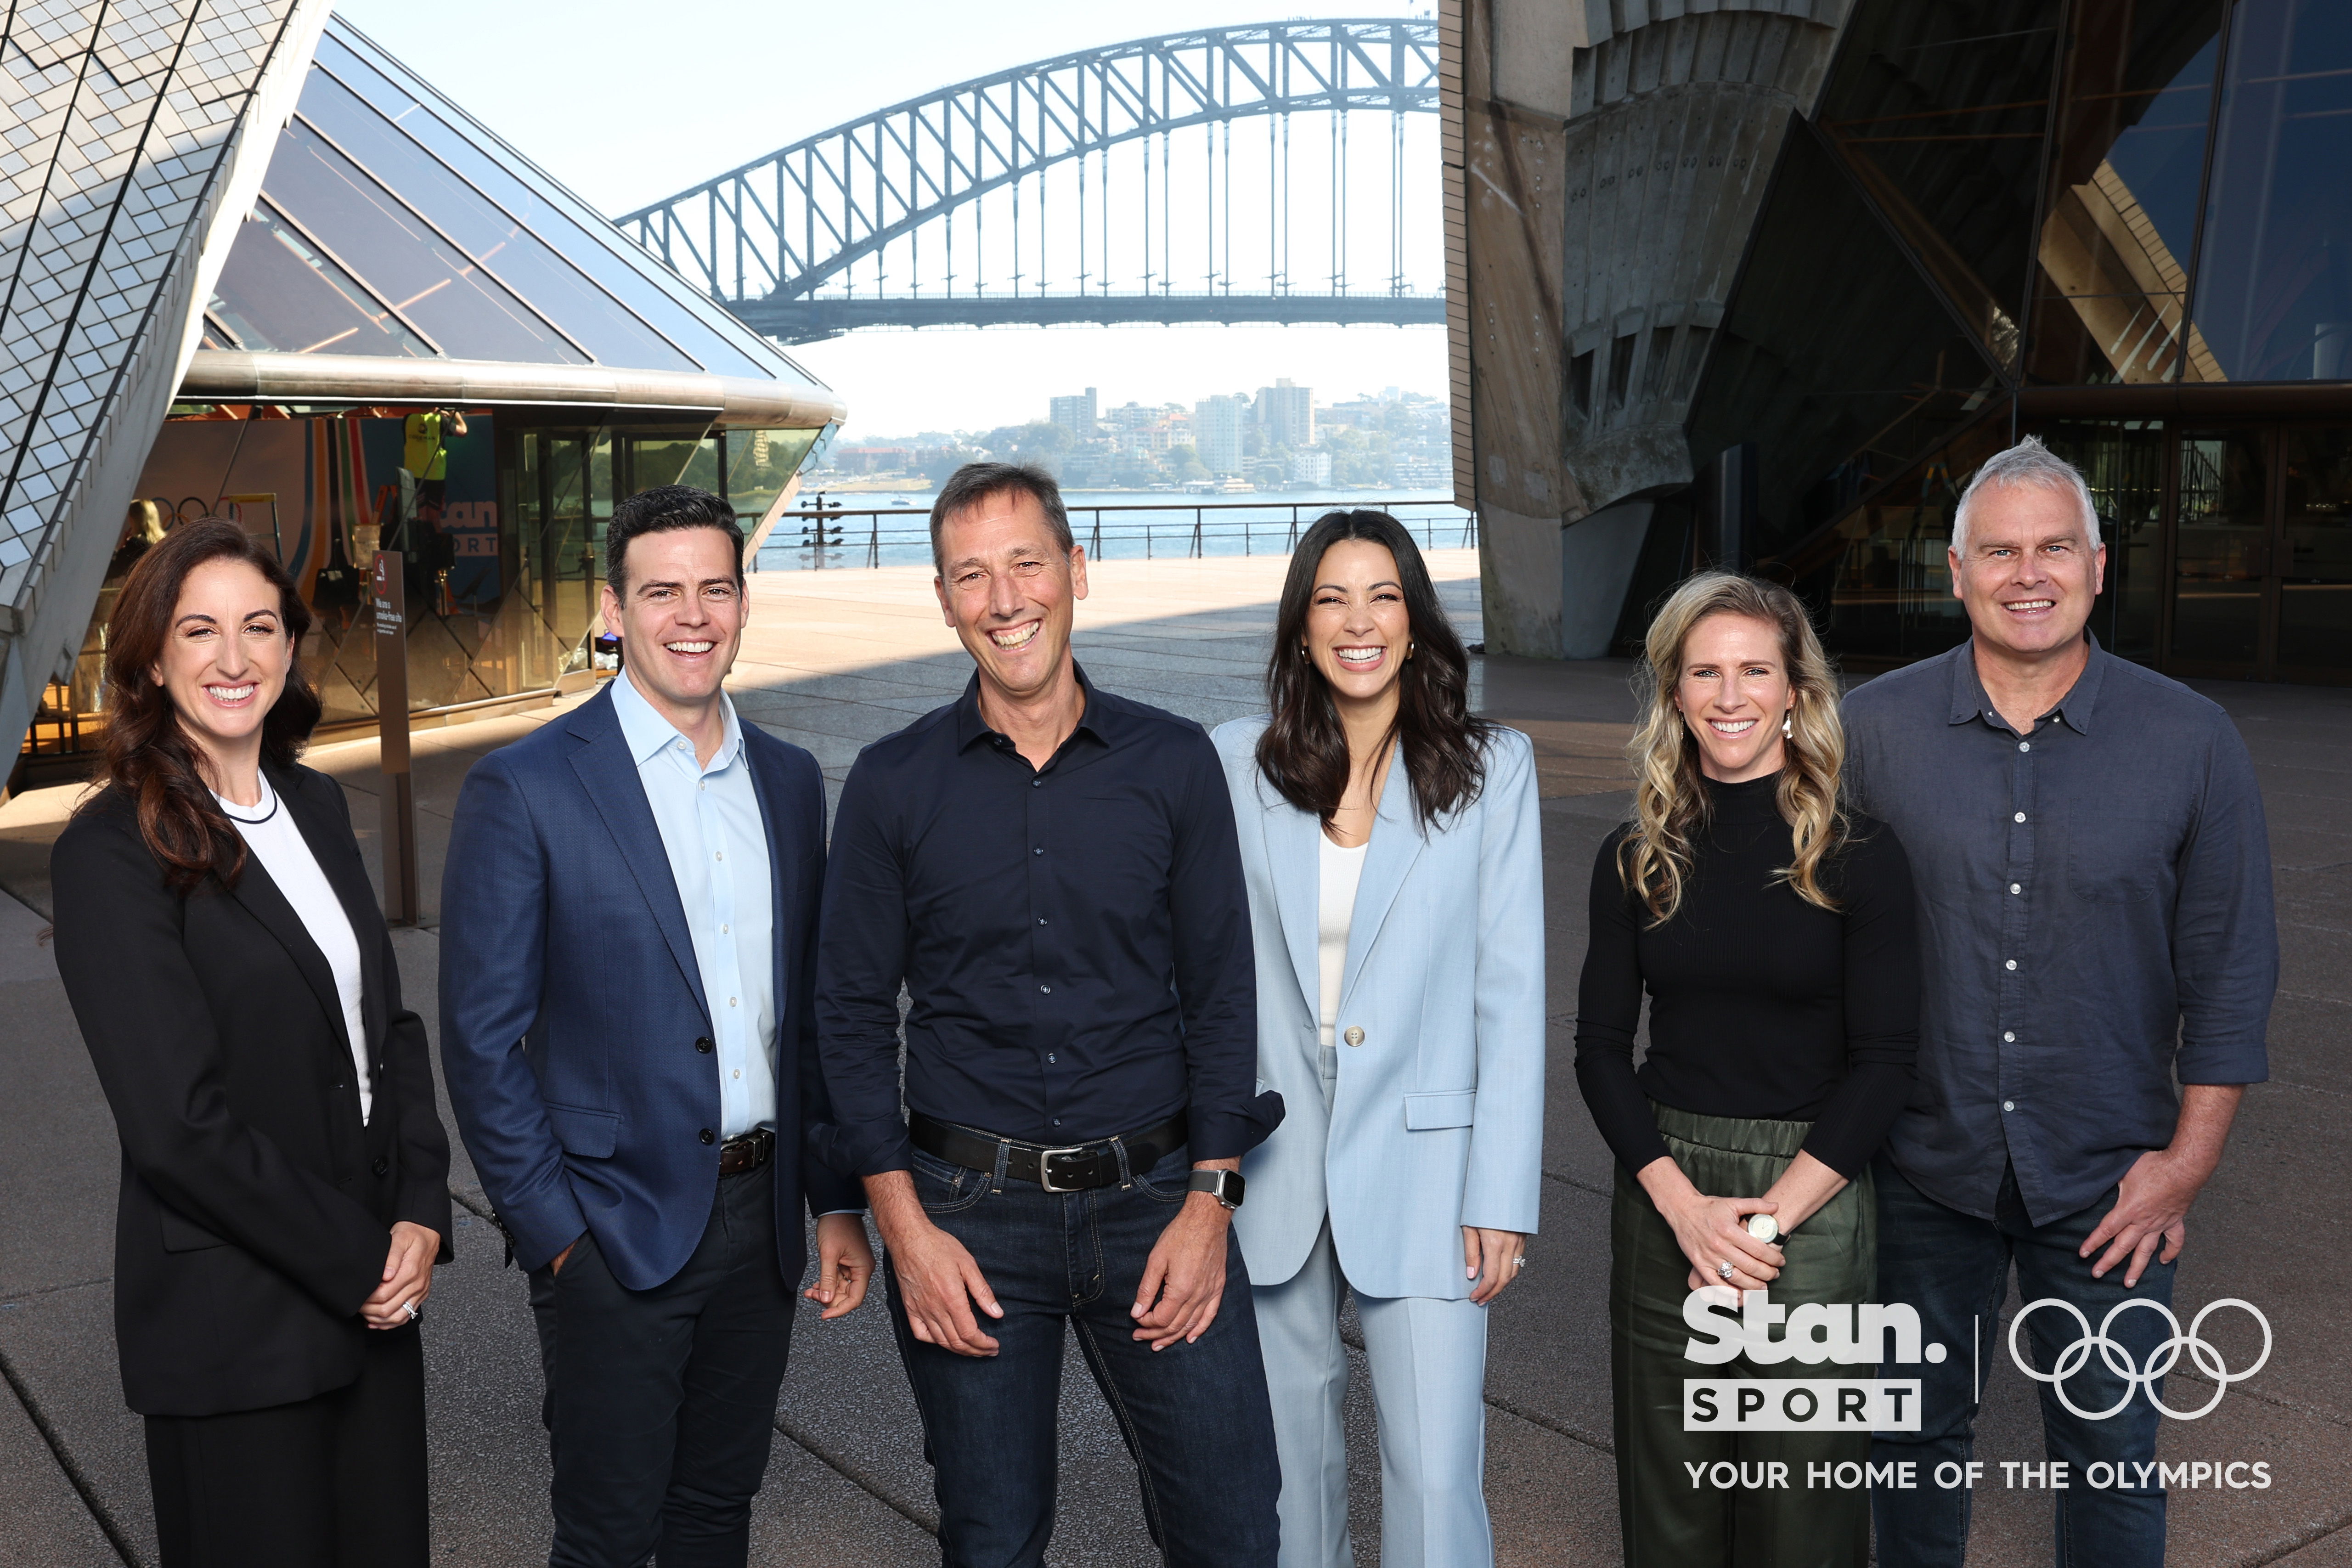 Stan's Paris 2024 Launch at the Sydney Opera House, Wednesday 29 May. L to R: Alicia Lucas, Michael Atkinson, Tara Rushton, CEO Martin Kugeler, Elise Kellond-Knight, Shane Heal